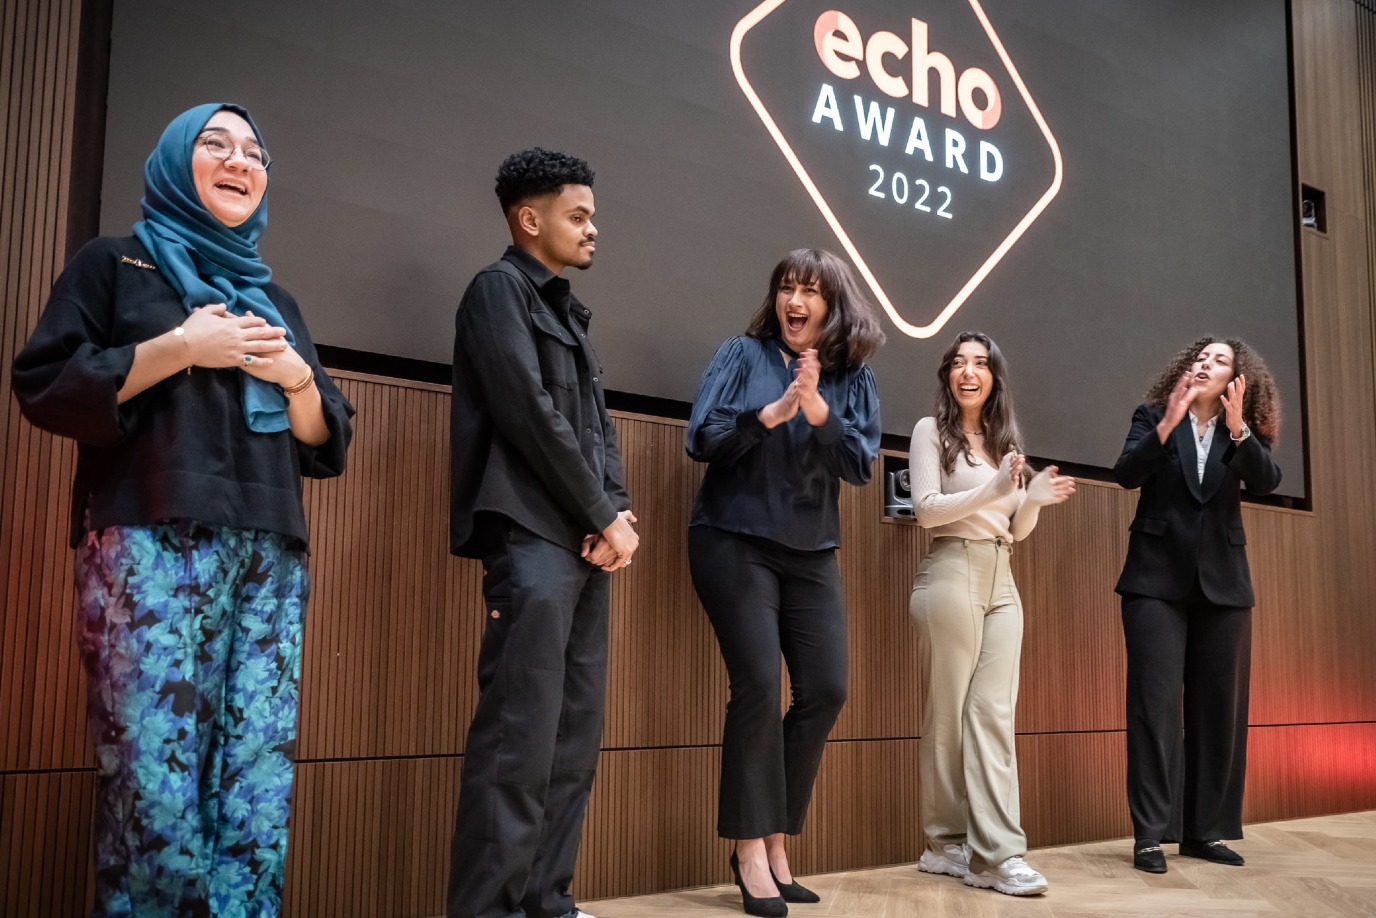 Five students celebrating in front of a screen that says "ECHO Award 2022"